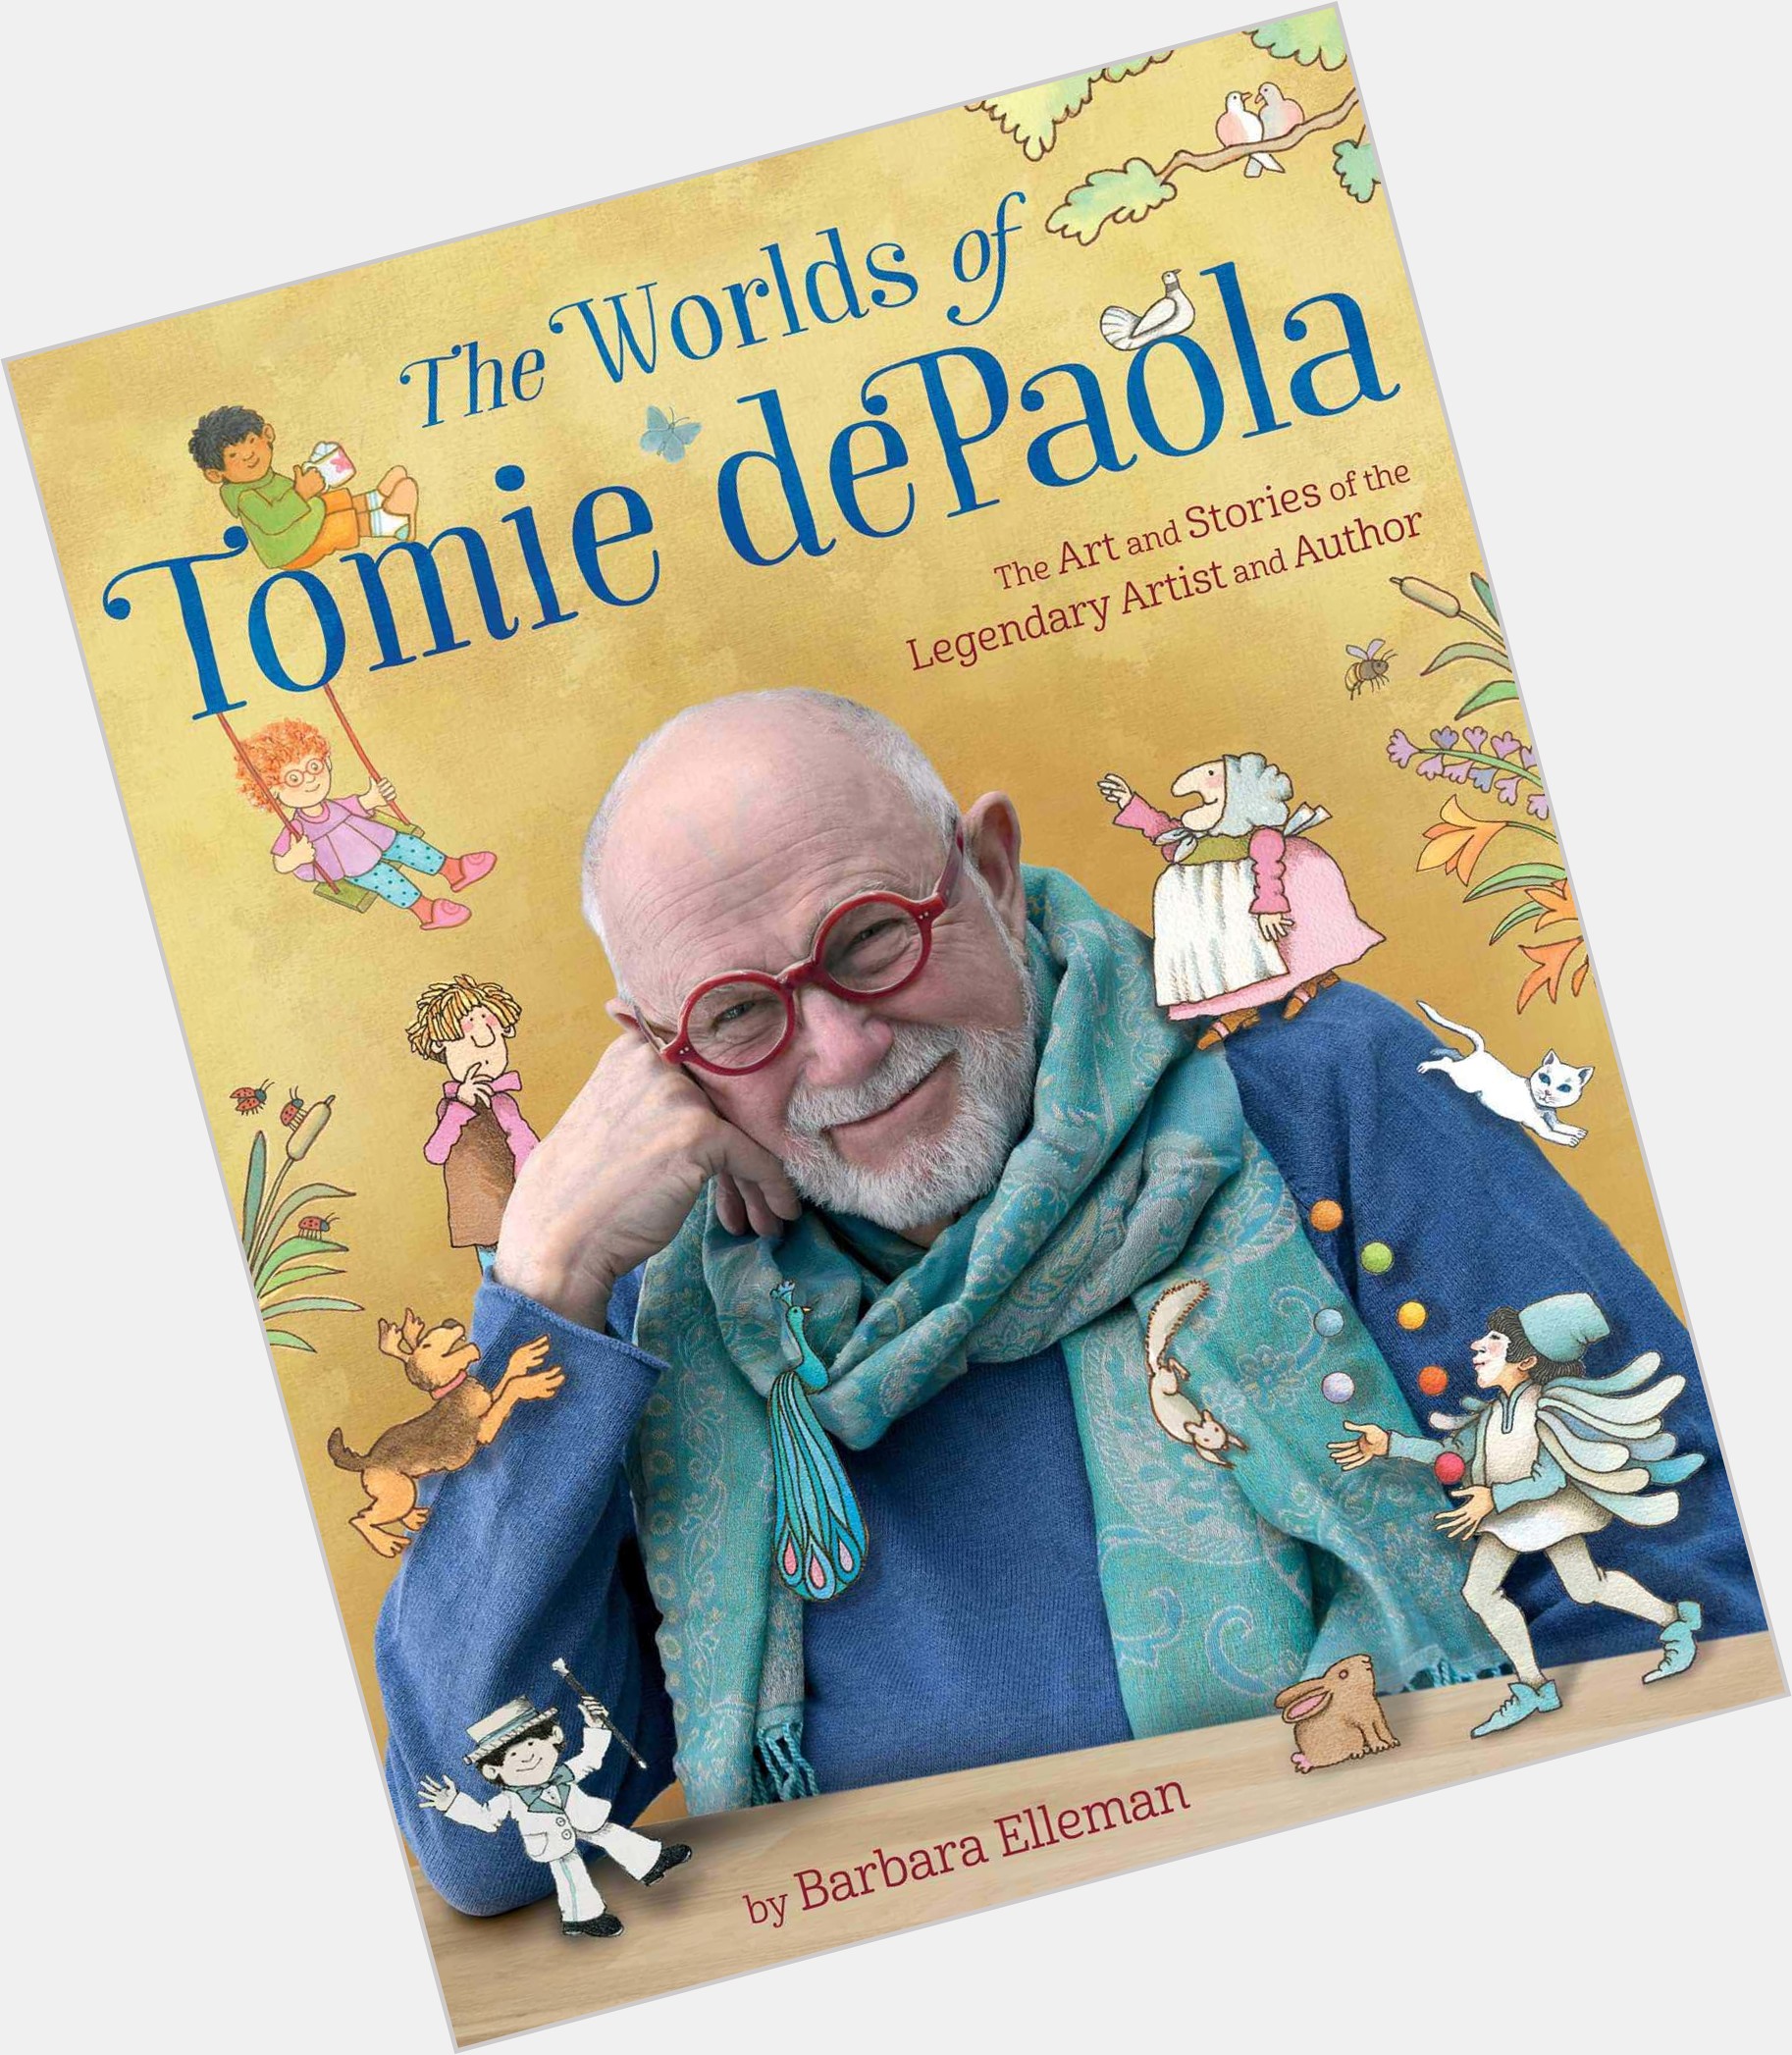 Http://fanpagepress.net/m/T/Tomie DePaola Dating 2